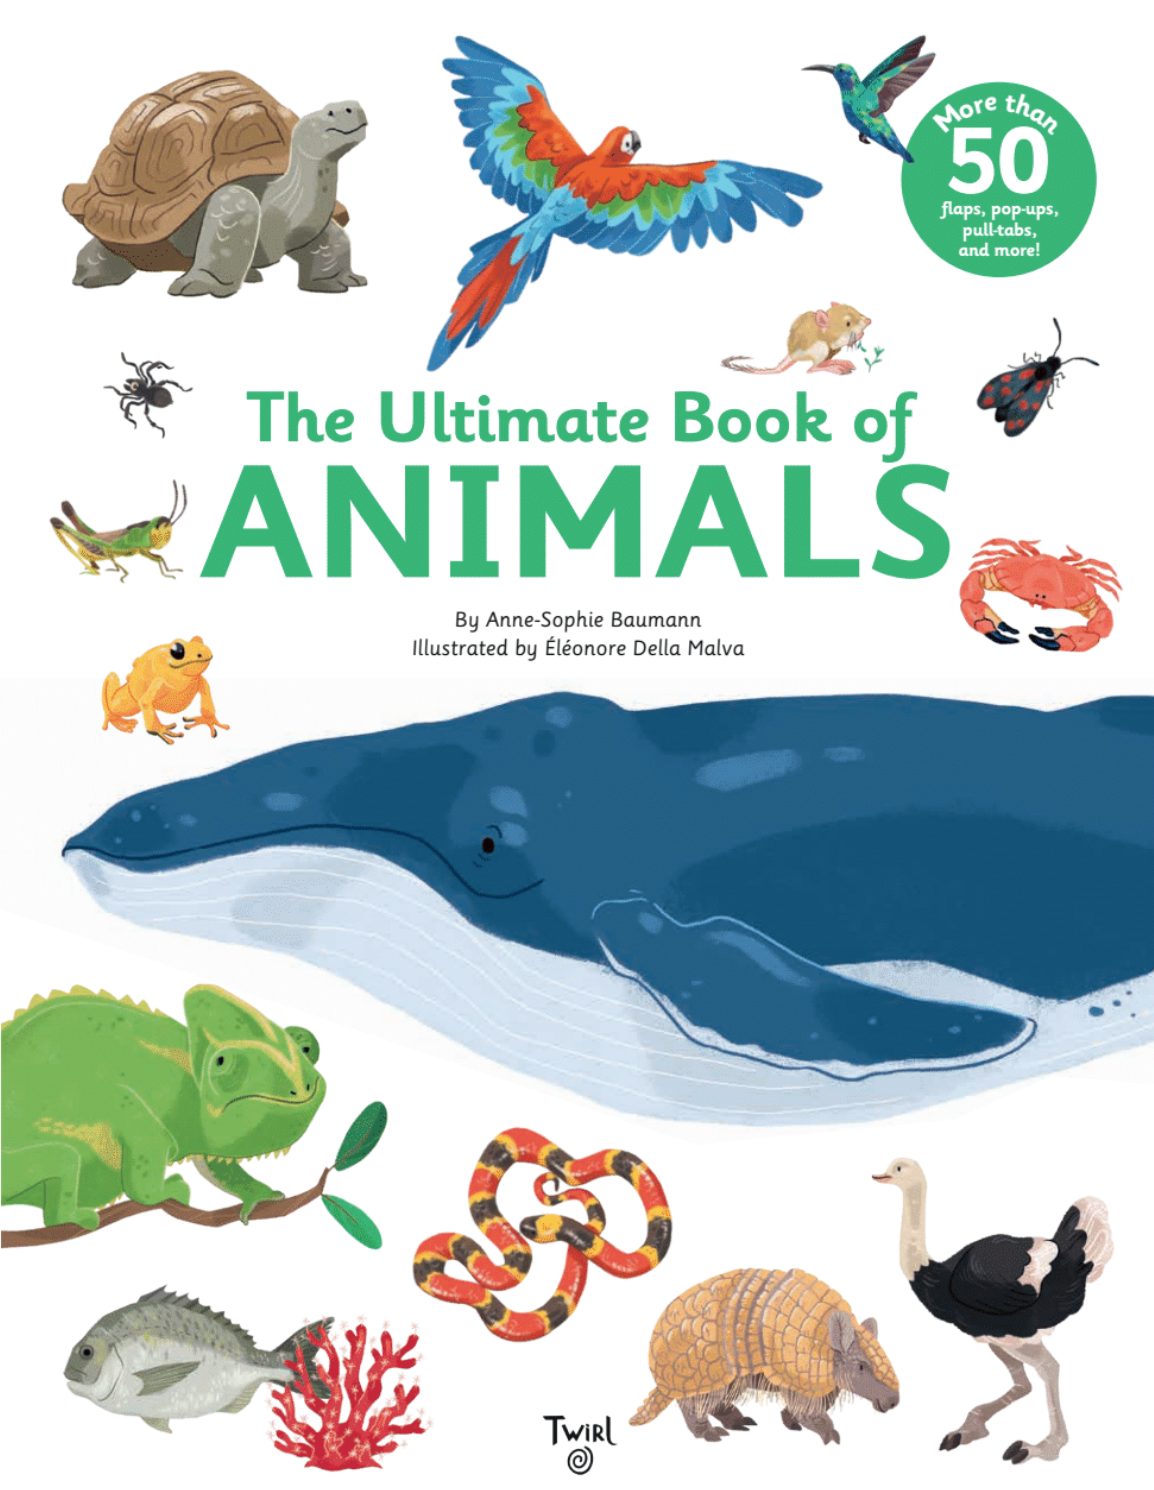 Cover image of "The Ultimate Book of Animals," an illustrated nonfiction book written by Anne-Sophie Baumann and illustrated by Éléonore Della Malva